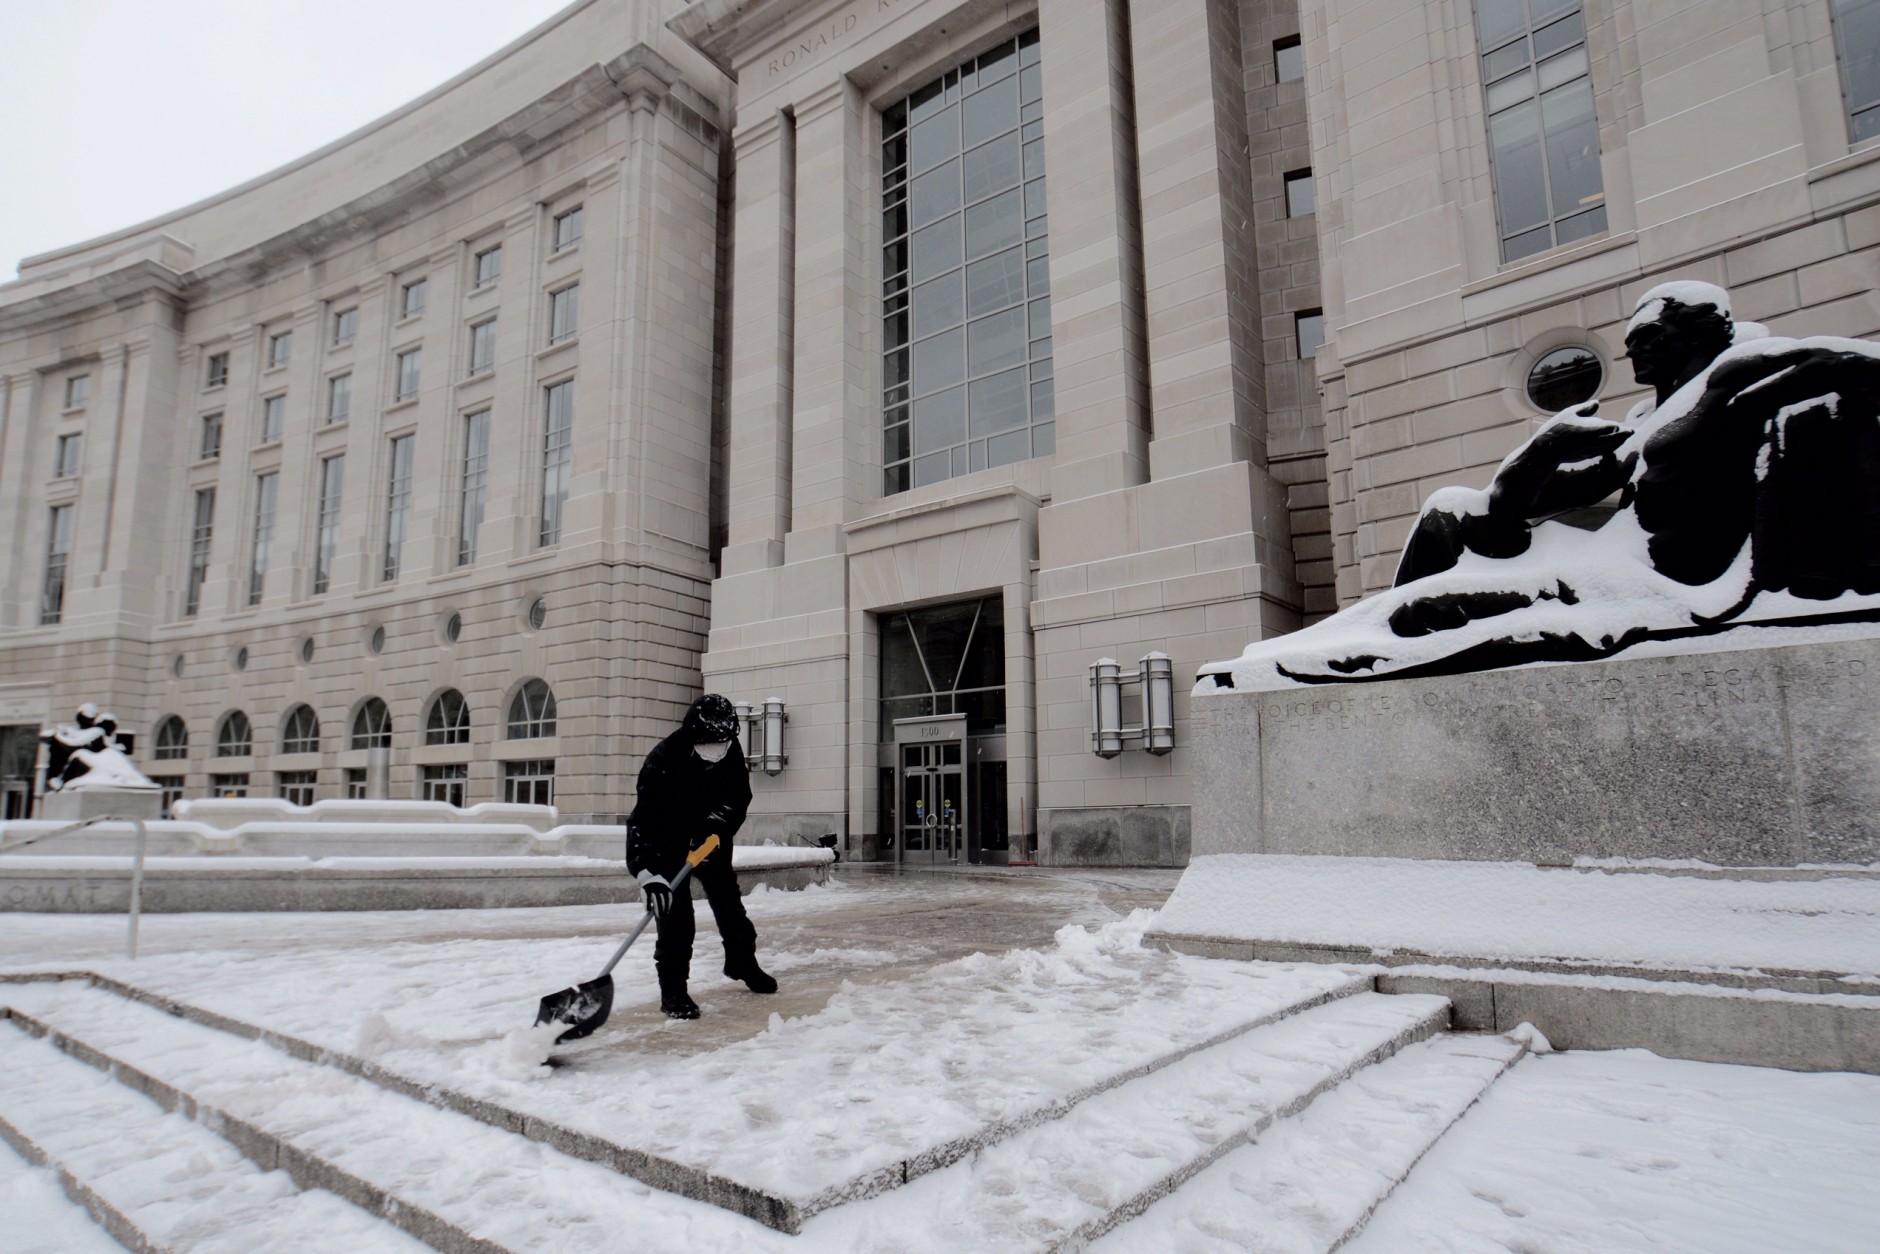 Crews at the Ronald Reagan Building and International Trade Center shovel after a 3-inch snowfall on Presidents Day, Monday, Feb. 15, 2016. (WTOP/Dave Dildine)